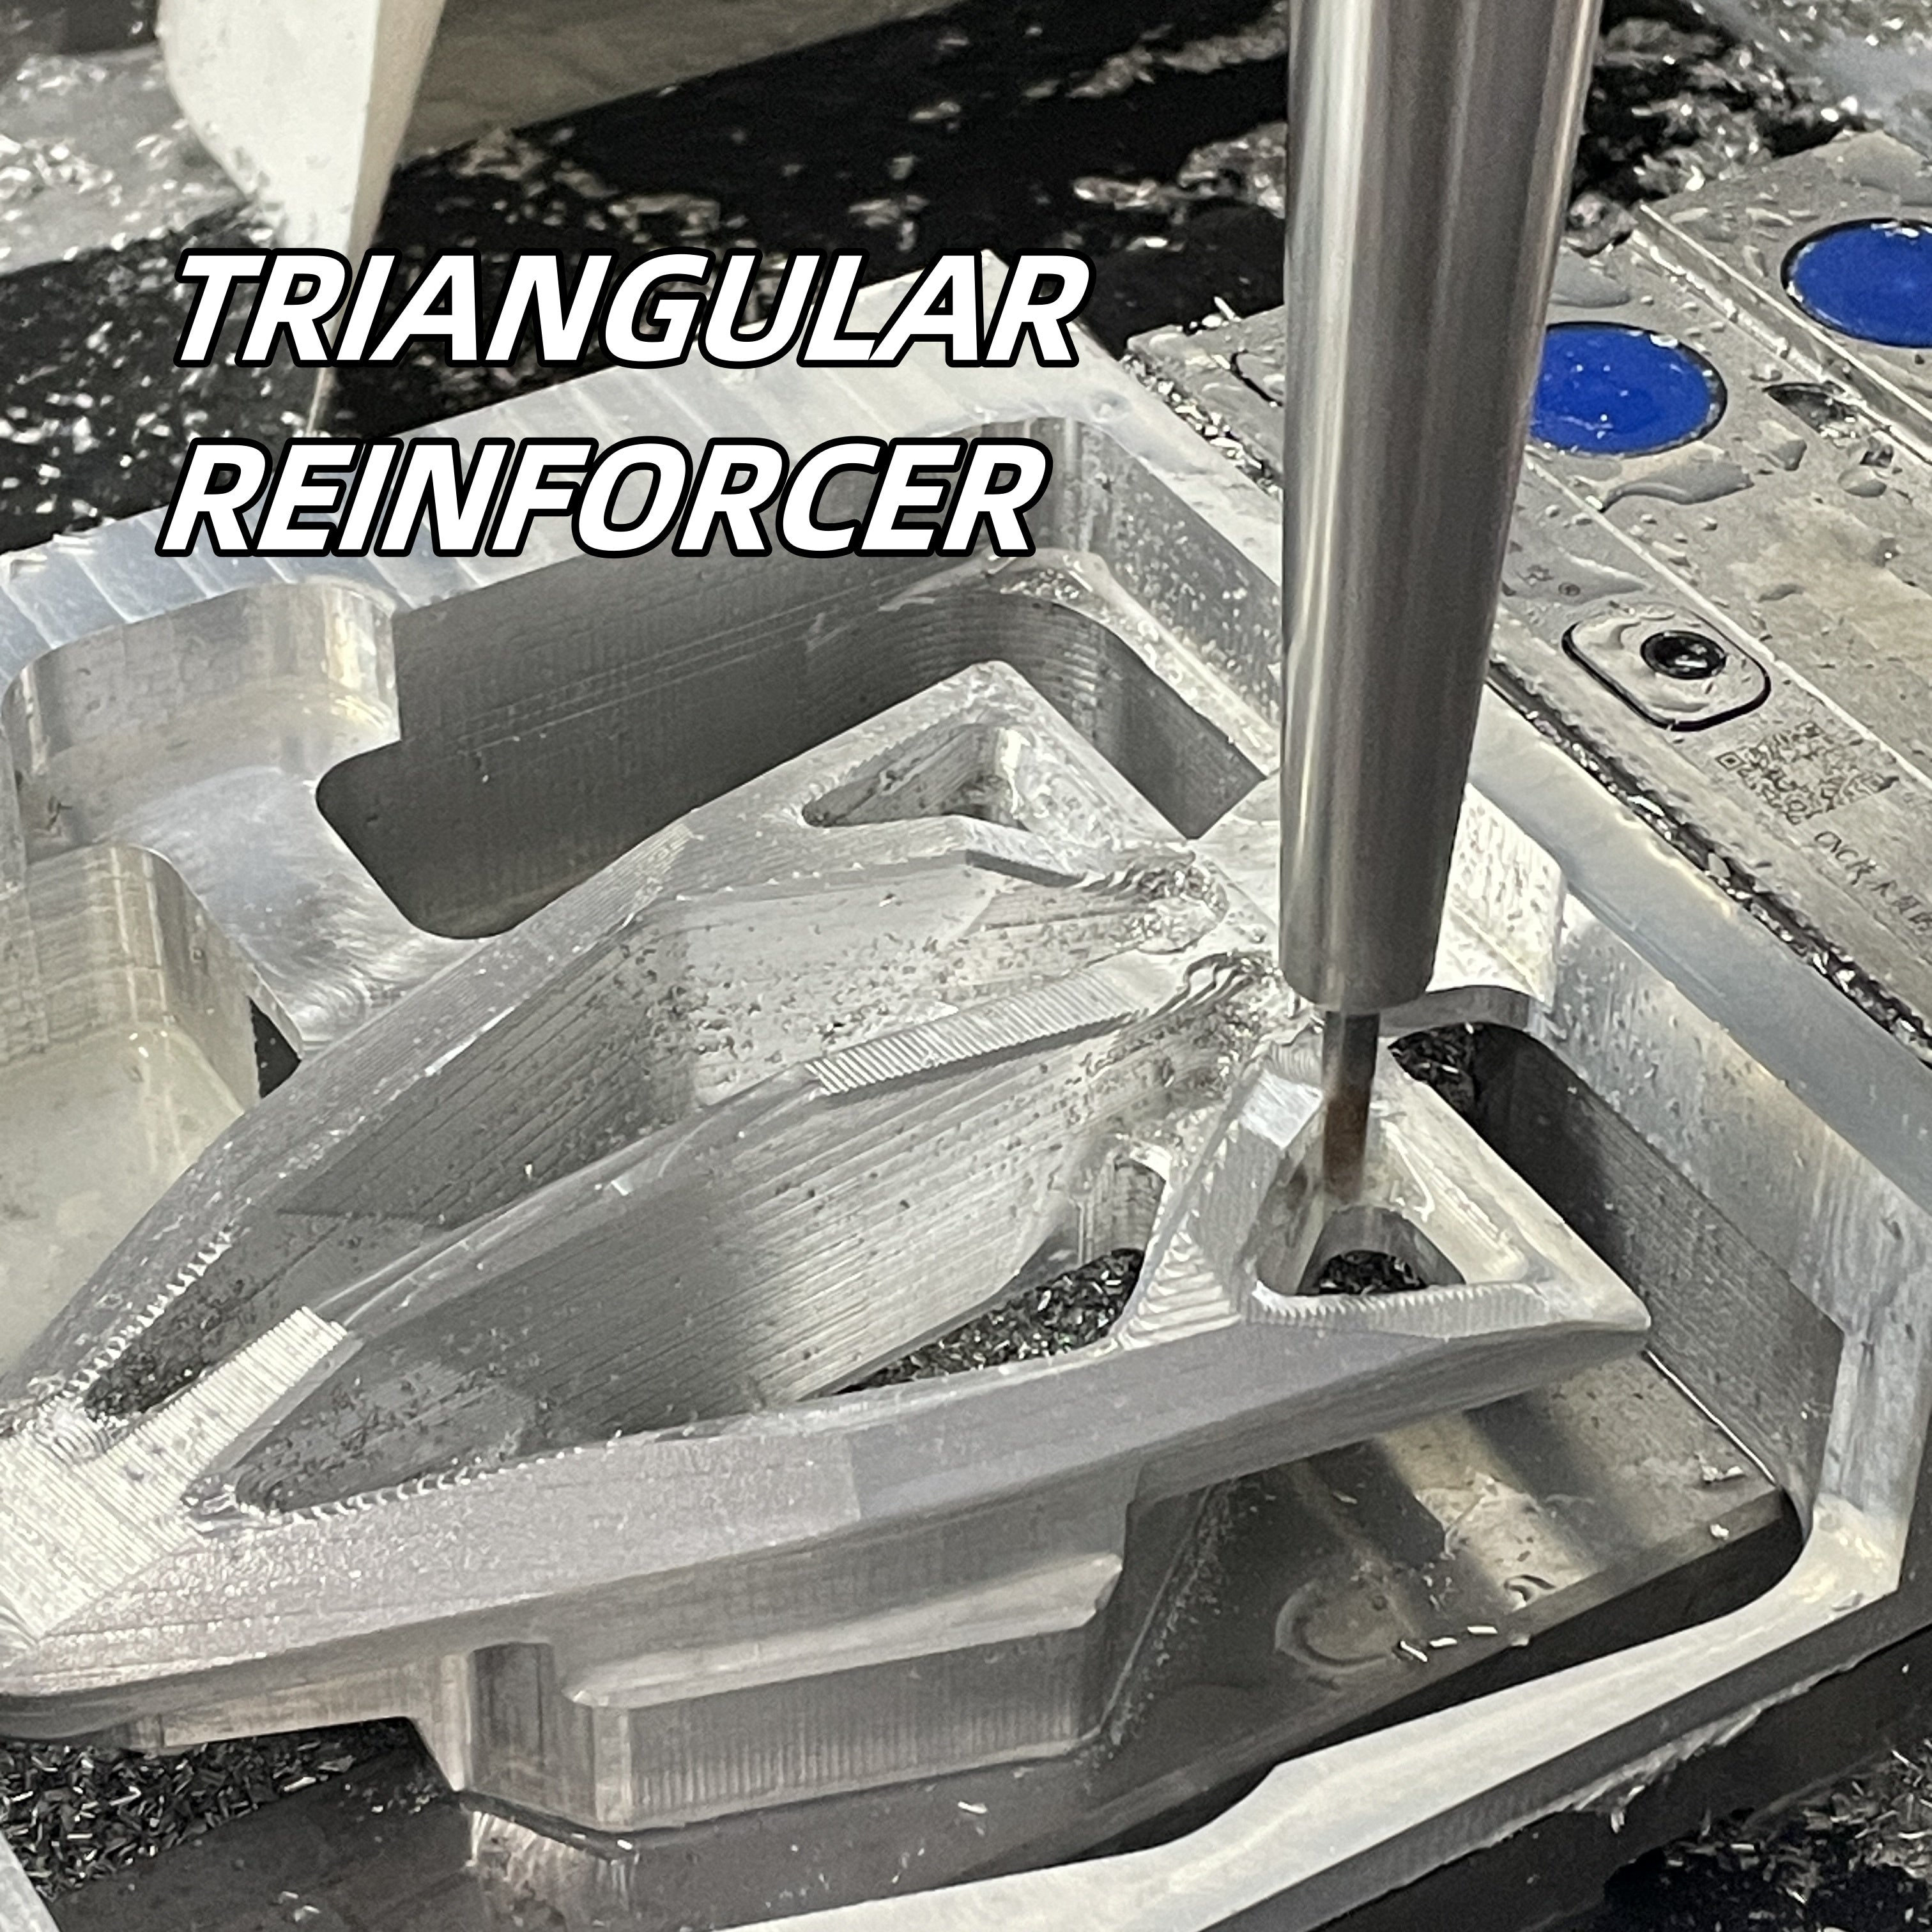 The CNC version of the triangular reinforcer is currently in production.🔥